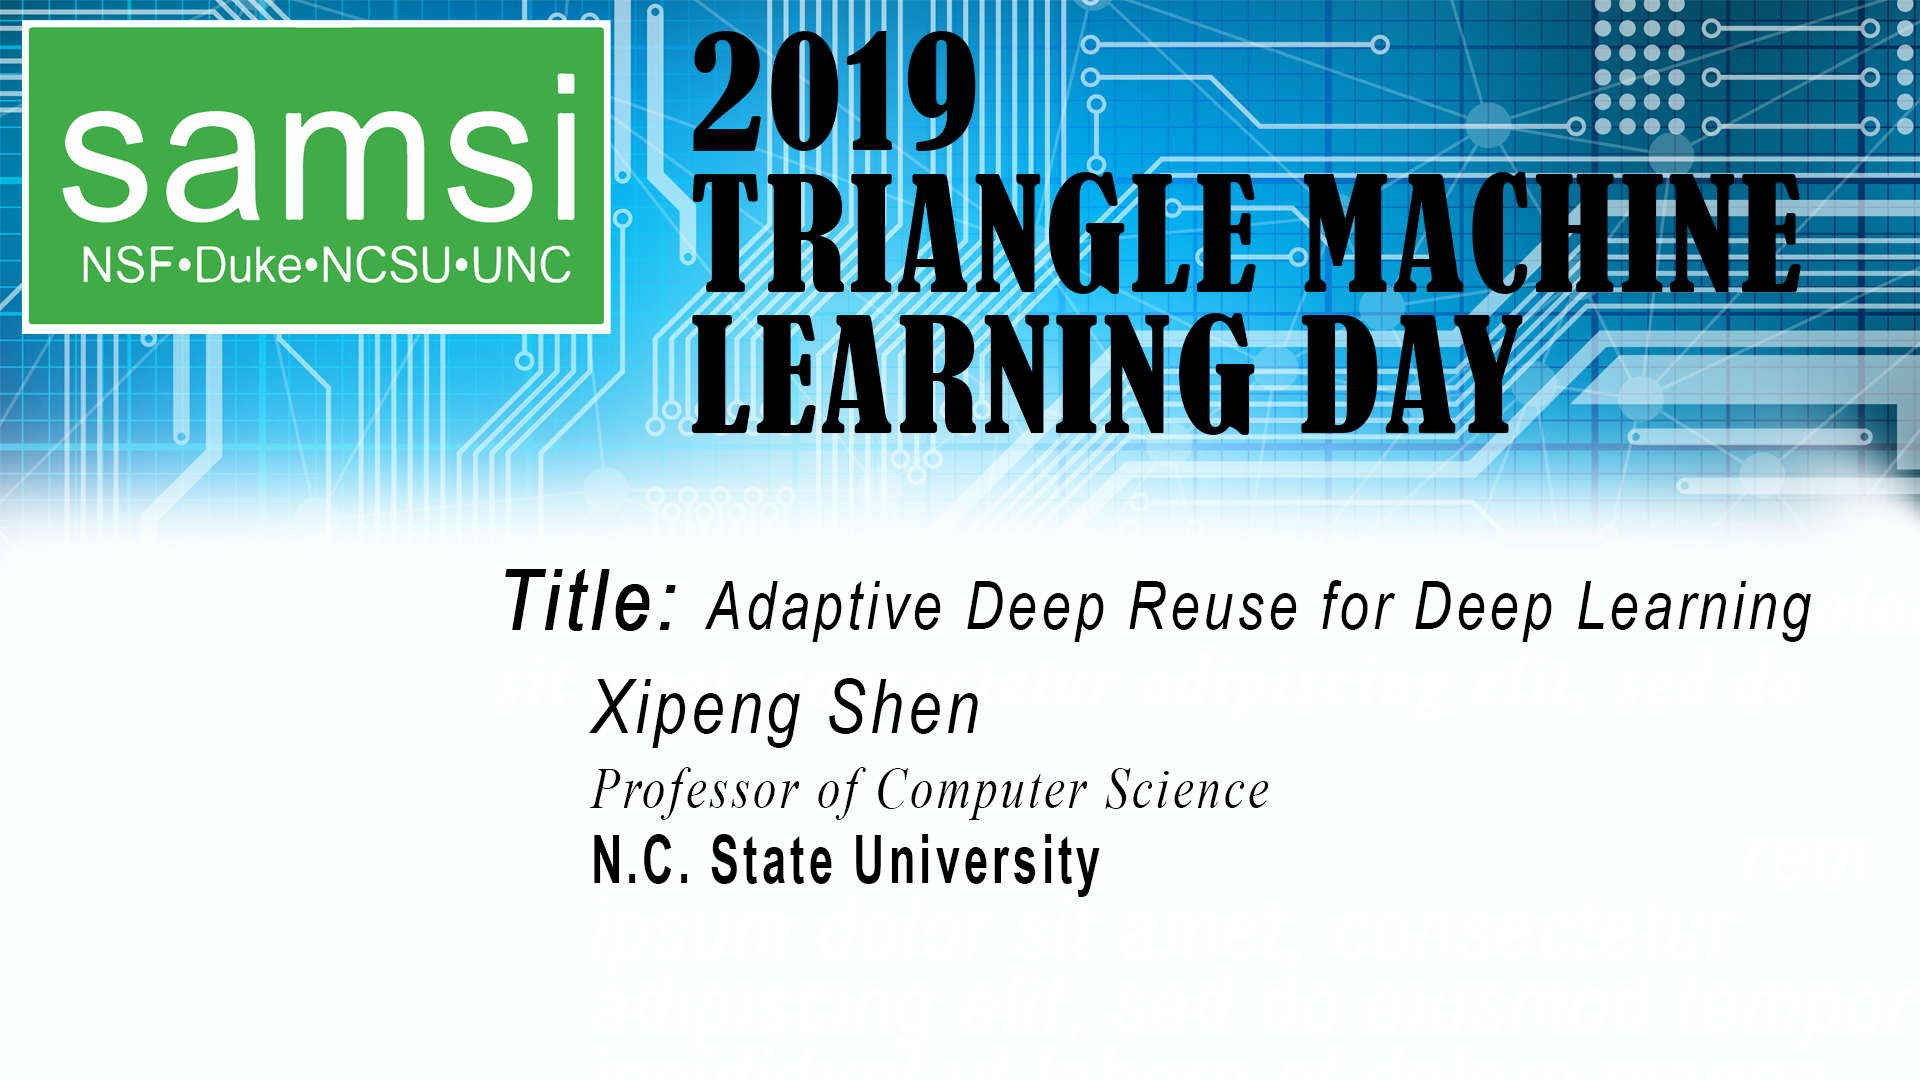 Deep Learning: Triangle Machine Learning Day - Adaptive Deep Reuse for Deep Learning, Xipeng Shen Thumbnail